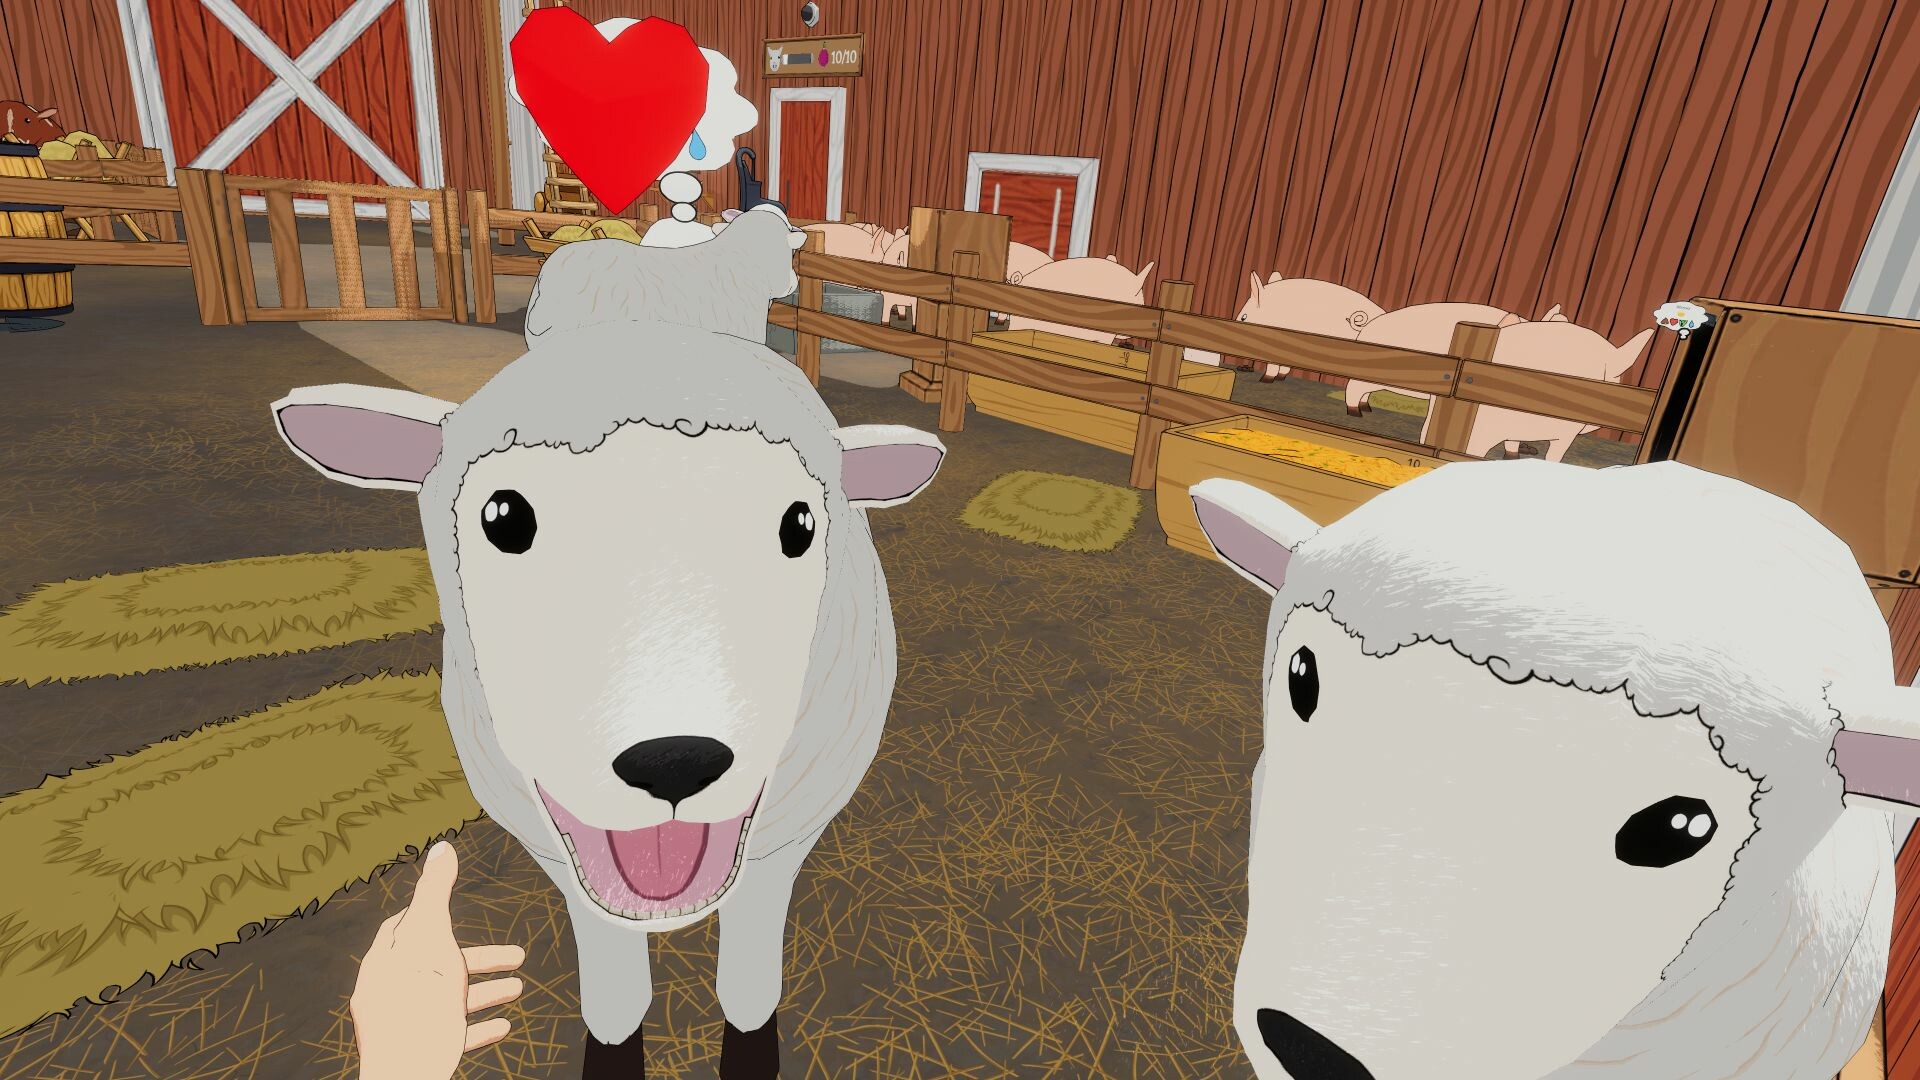 VR-enabled farming game Across the Valley launches in April